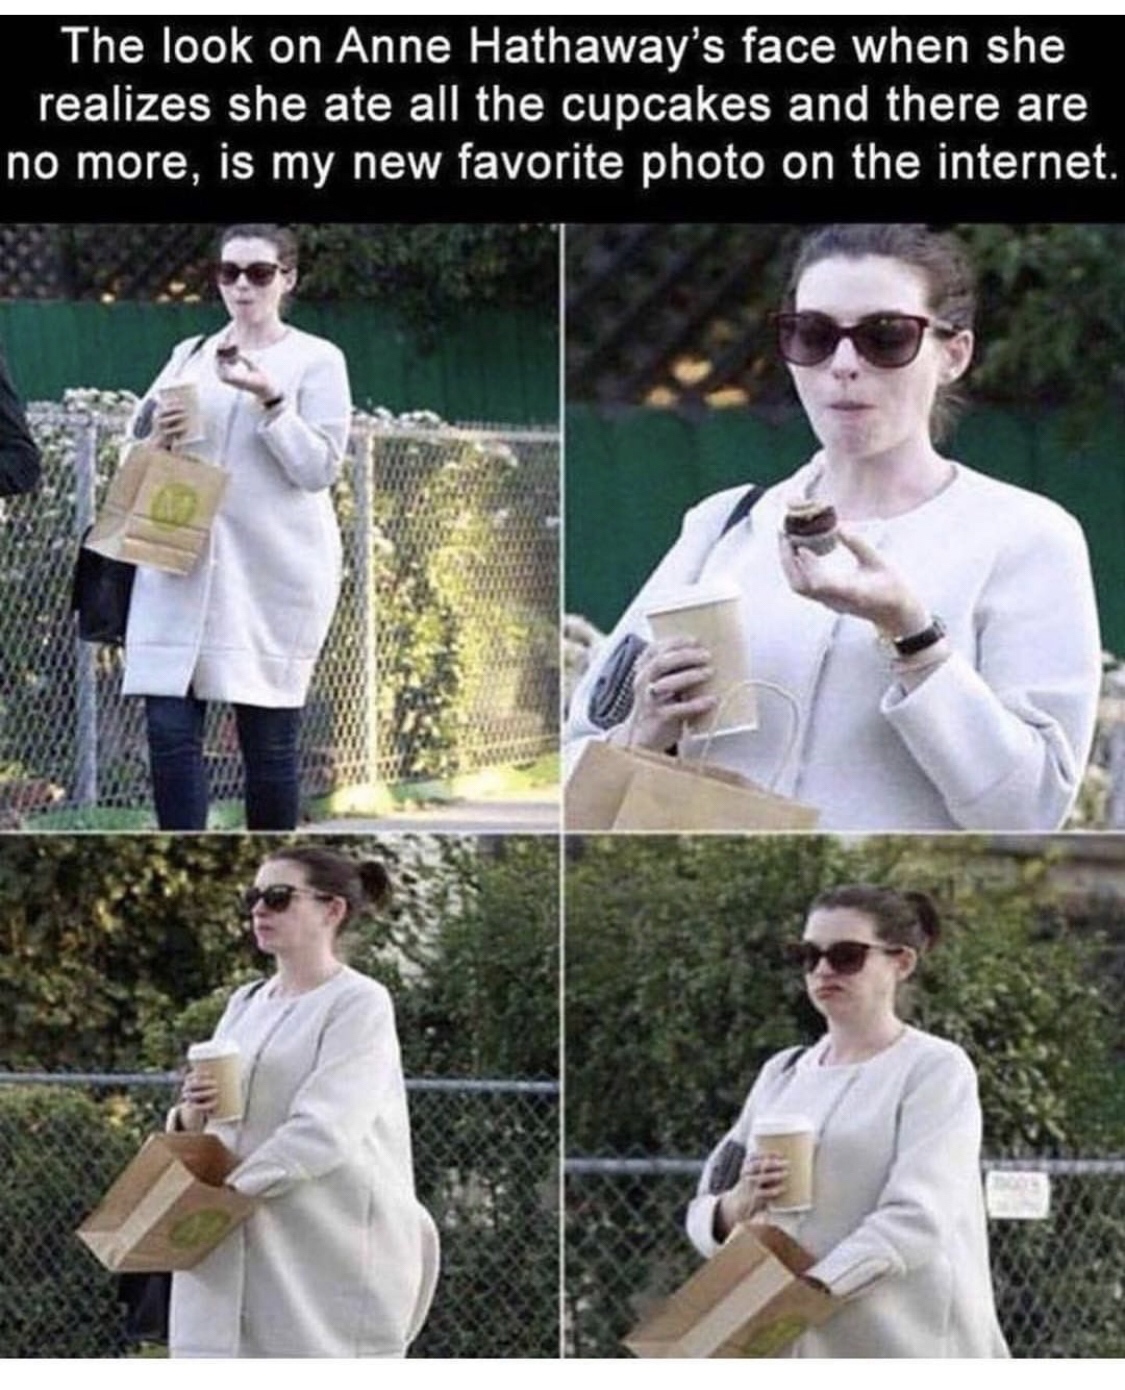 anne hathaway cupcakes - The look on Anne Hathaway's face when she realizes she ate all the cupcakes and there are no more, is my new favorite photo on the internet.